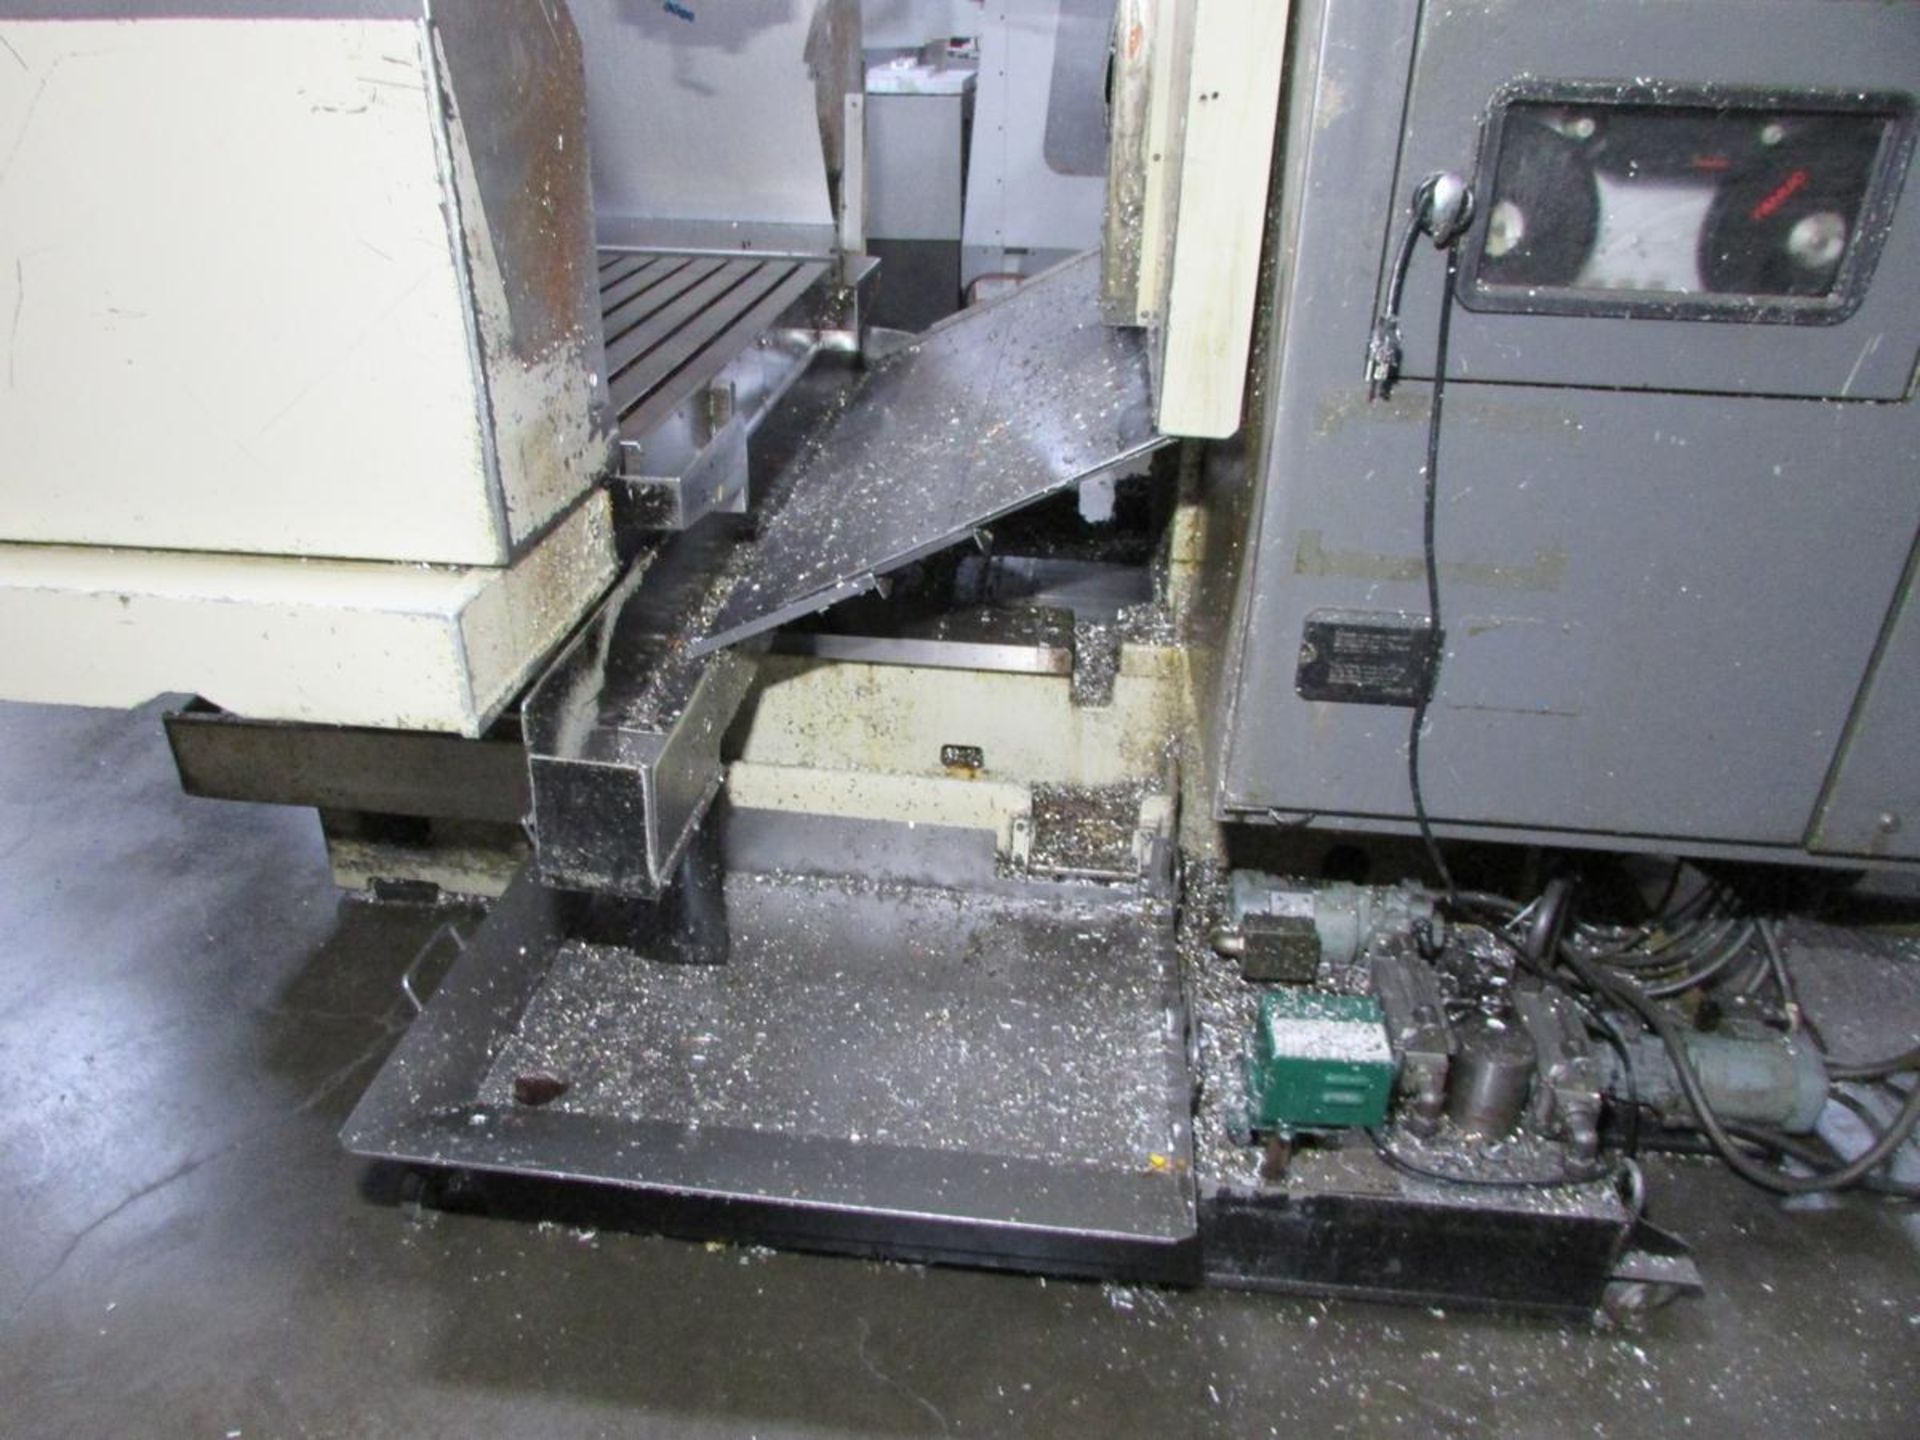 LeBlond Makino FNC106-A30 3-Axis CNC Vertical Maching Center - Image 14 of 25